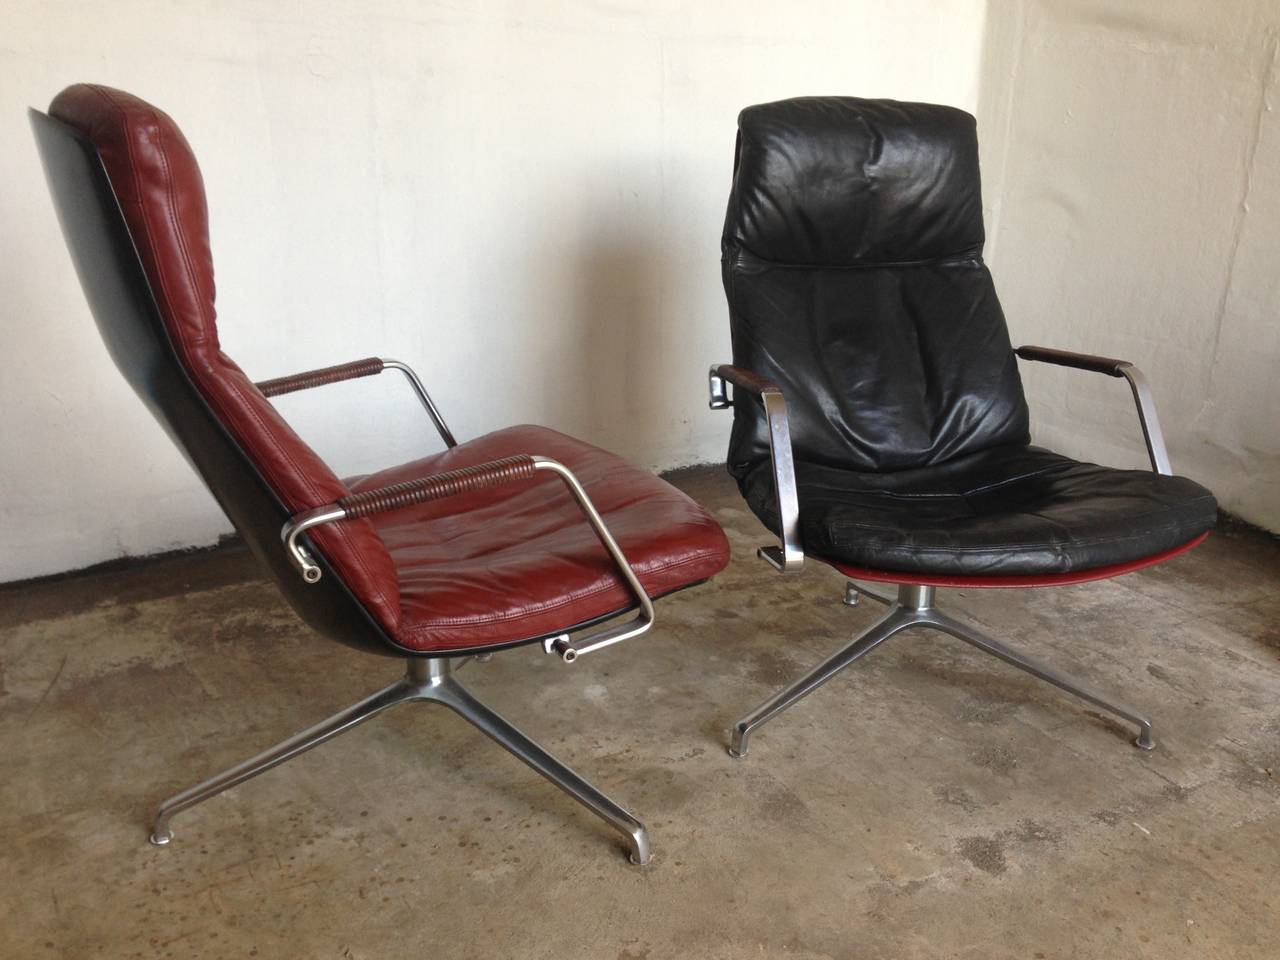 2x Preben Fabricius Jorgen Kastholm lounge chairs
Produced by Kill international 1965
These two are first editions with polyester shell back ,one in red and the other in black
Leather sitting cushions
metal armrest covered with leather